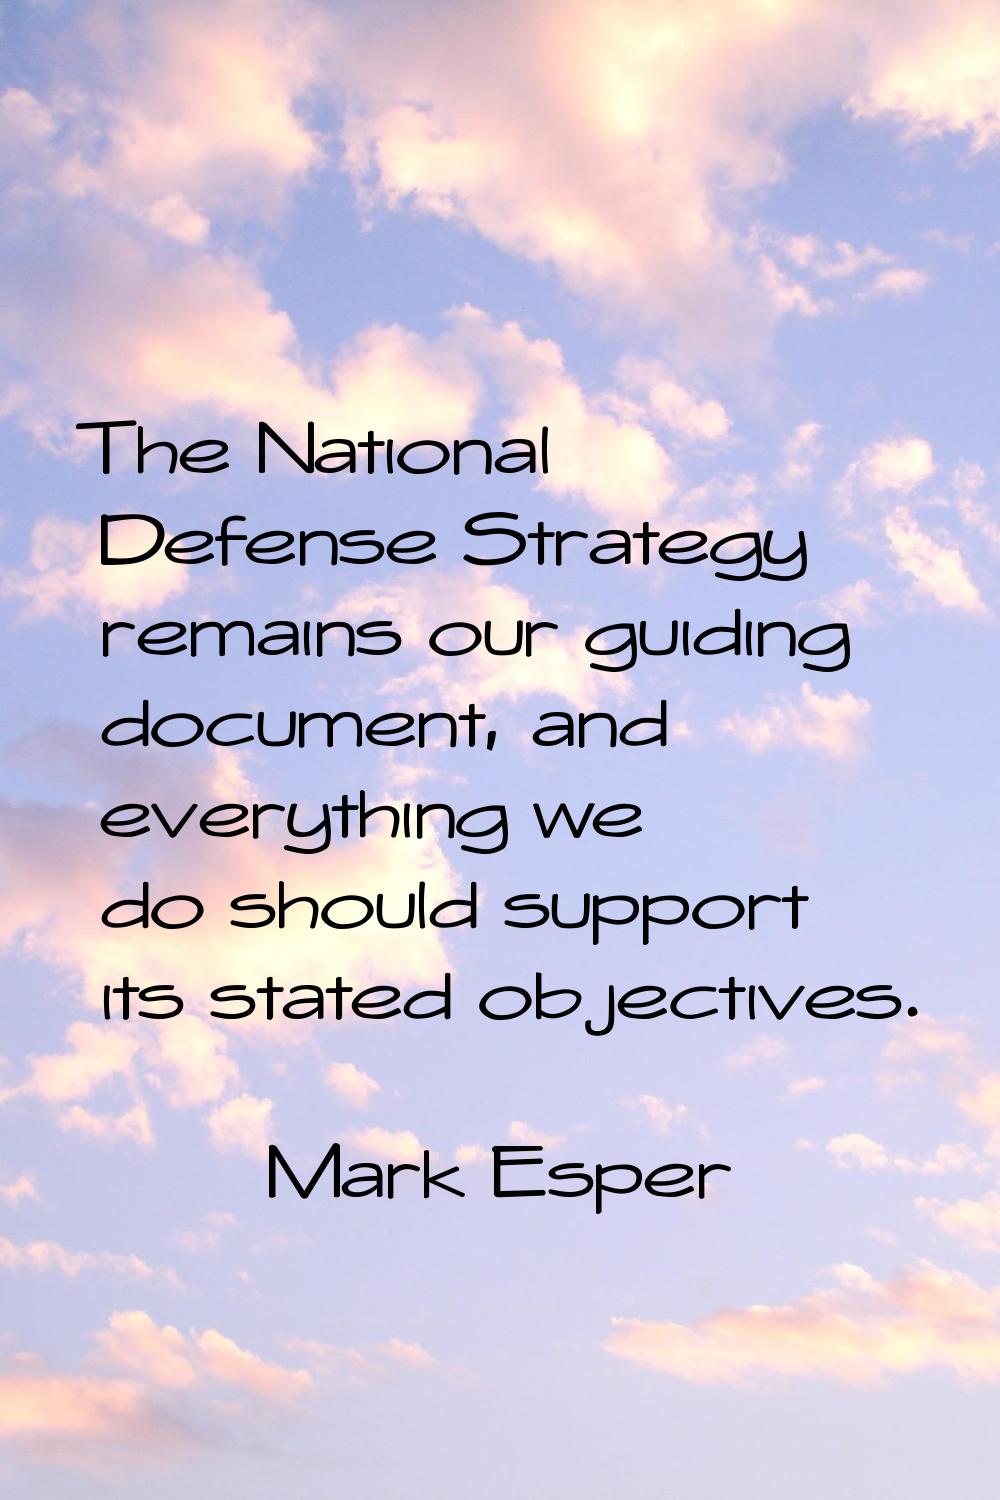 The National Defense Strategy remains our guiding document, and everything we do should support its